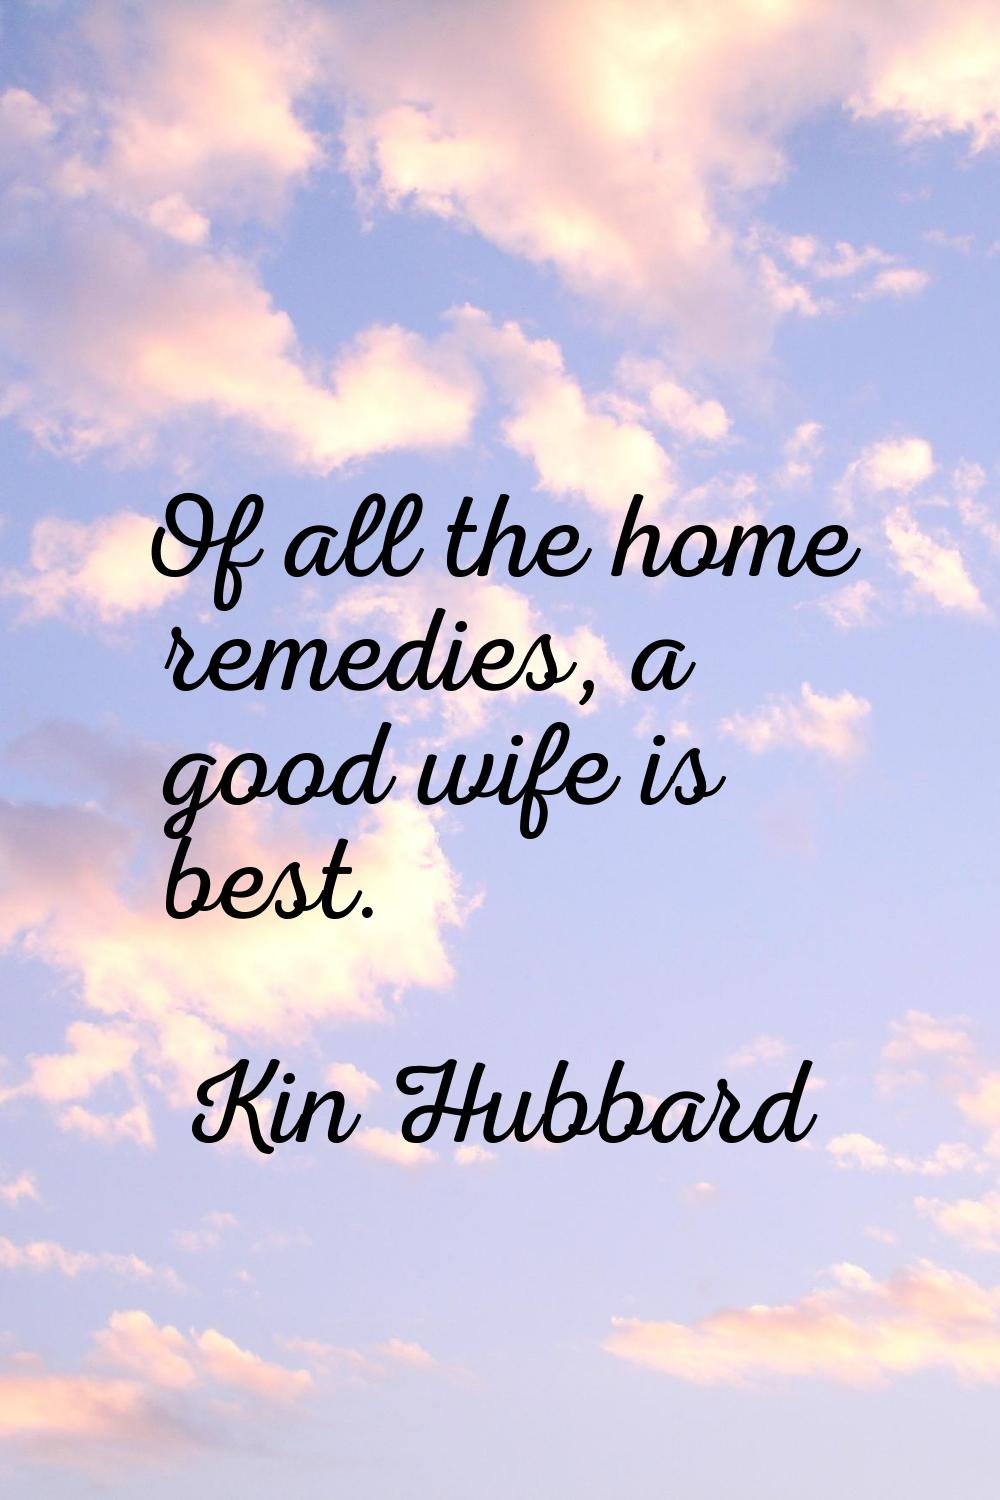 Of all the home remedies, a good wife is best.